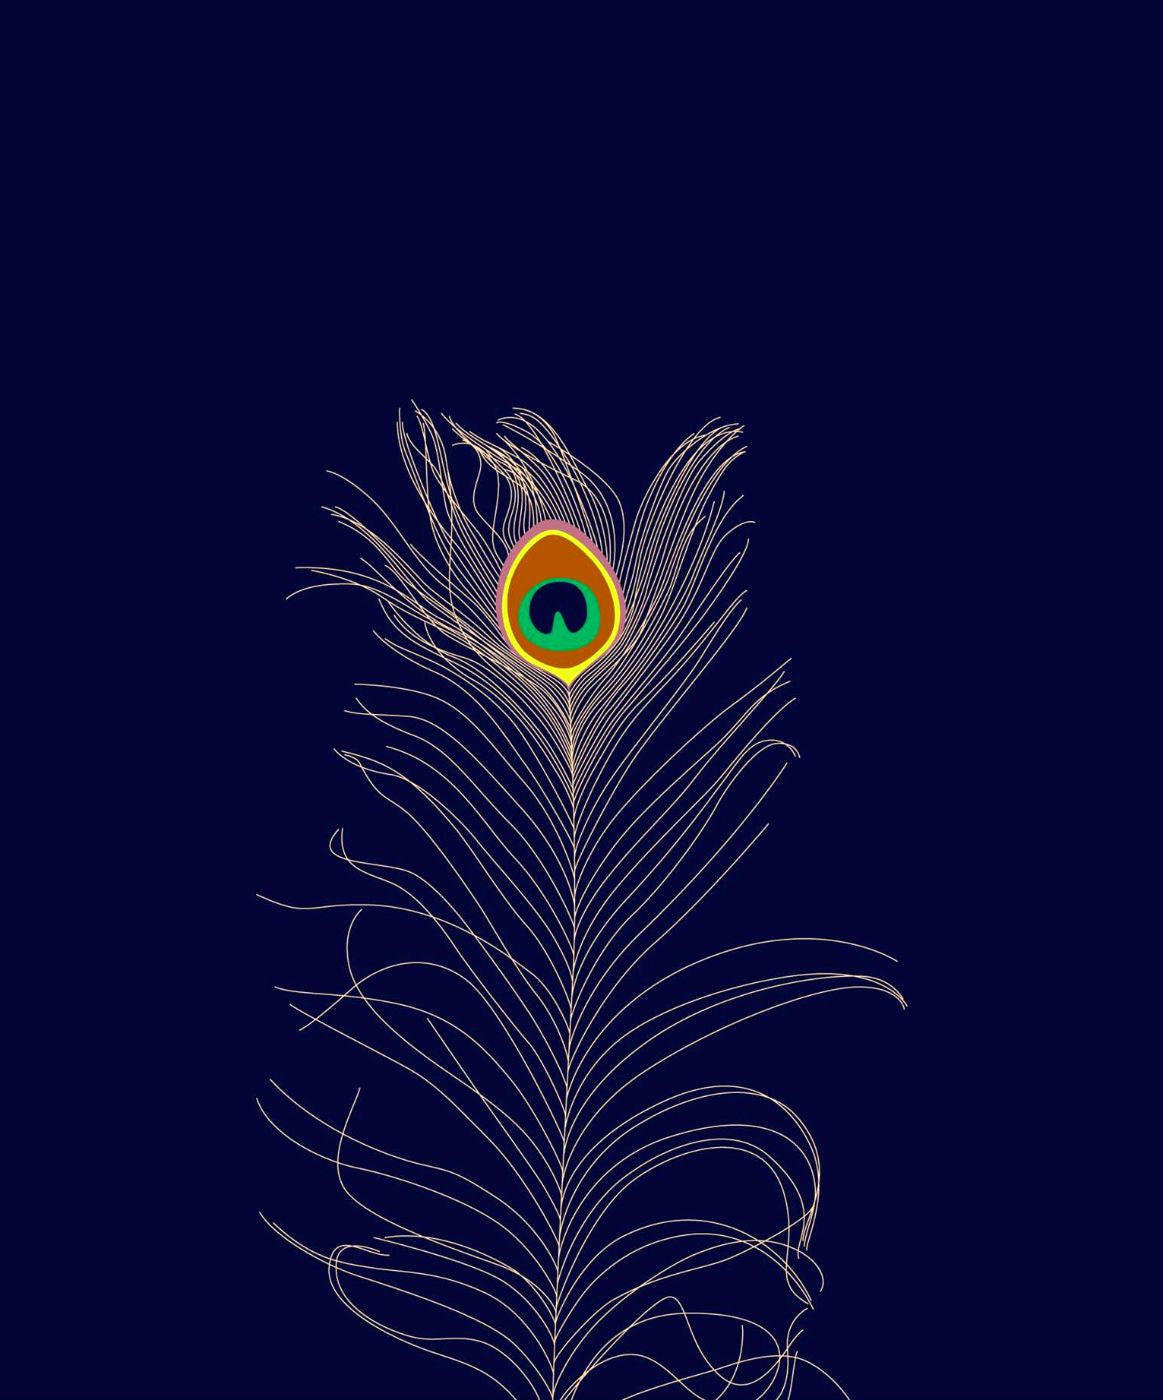 Minimalist Art - Peacock Feather - Posters by Christopher Noel ...